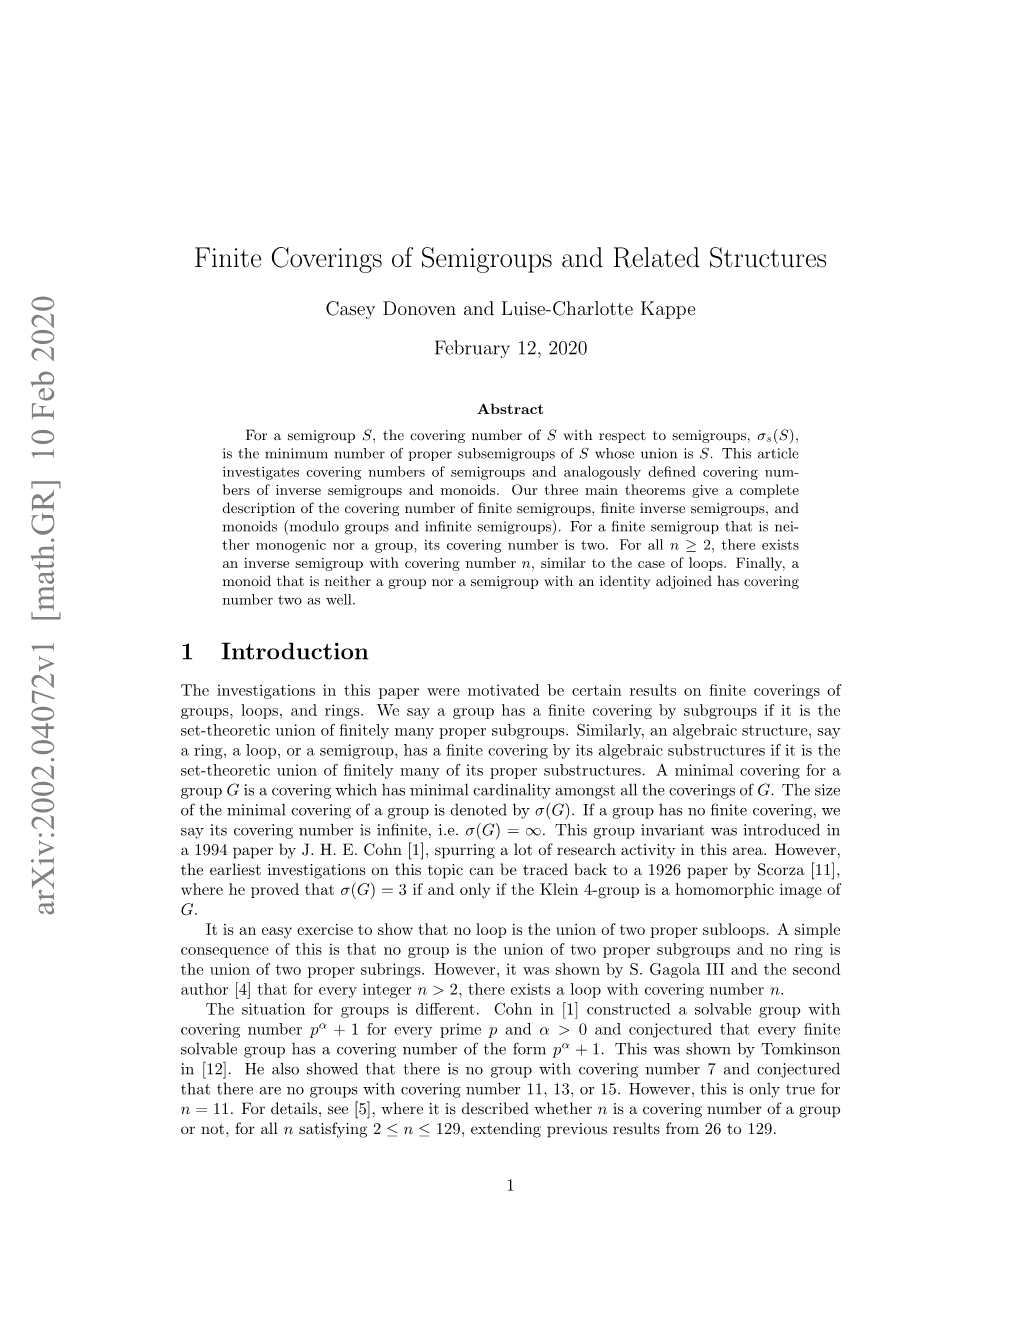 Finite Coverings of Semigroups and Related Structures